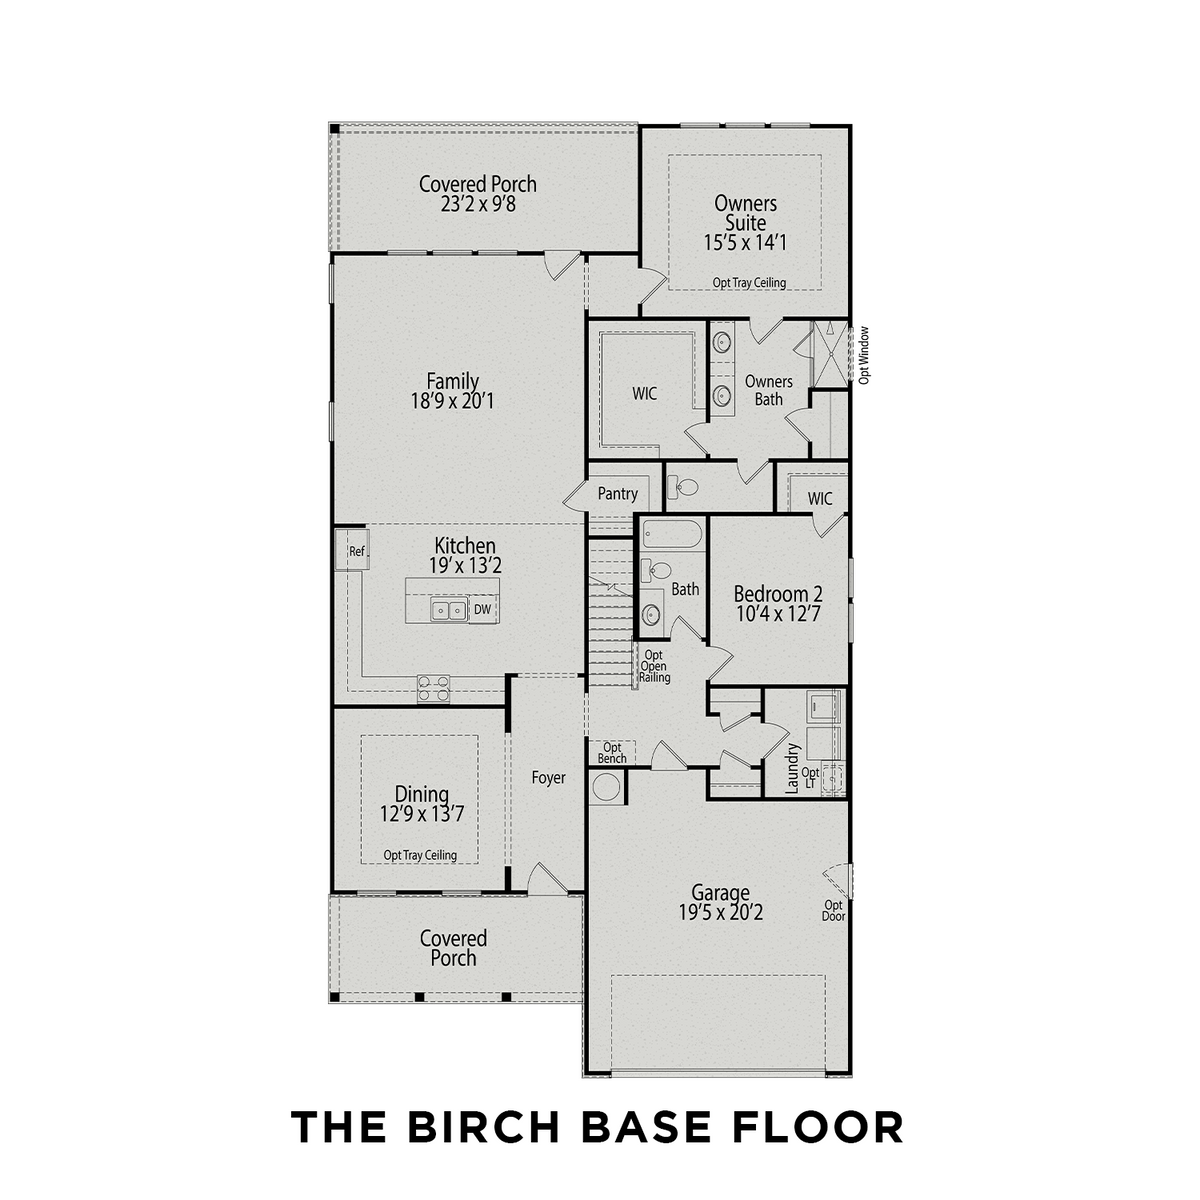 1 - The Birch A buildable floor plan layout in Davidson Homes' Carellton community.